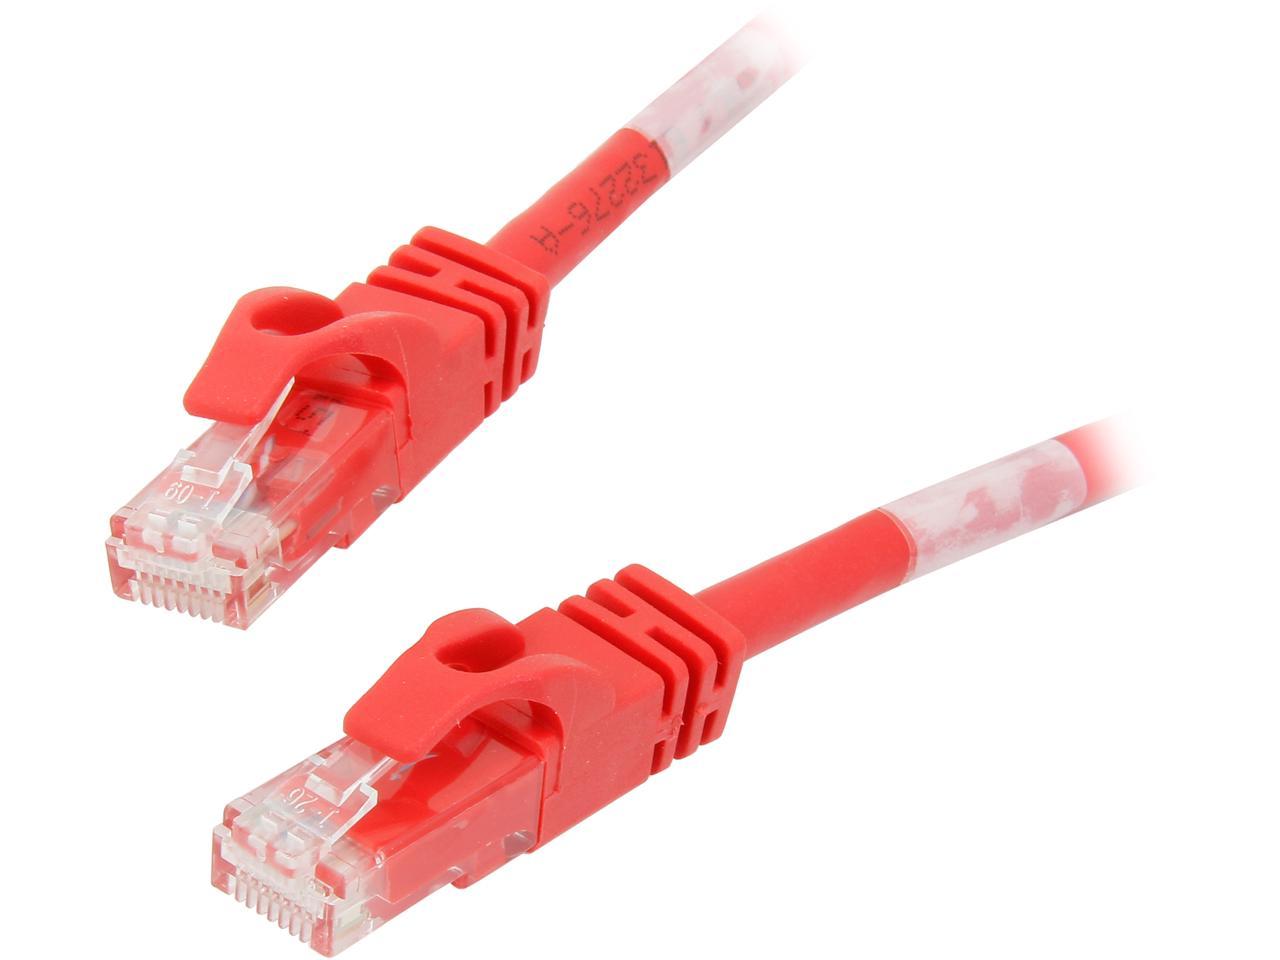 Snagless Unshielded Network Patch Cable C2G 27863 Cat6 Crossover Cable 10 Feet, 3.04 Meters Red